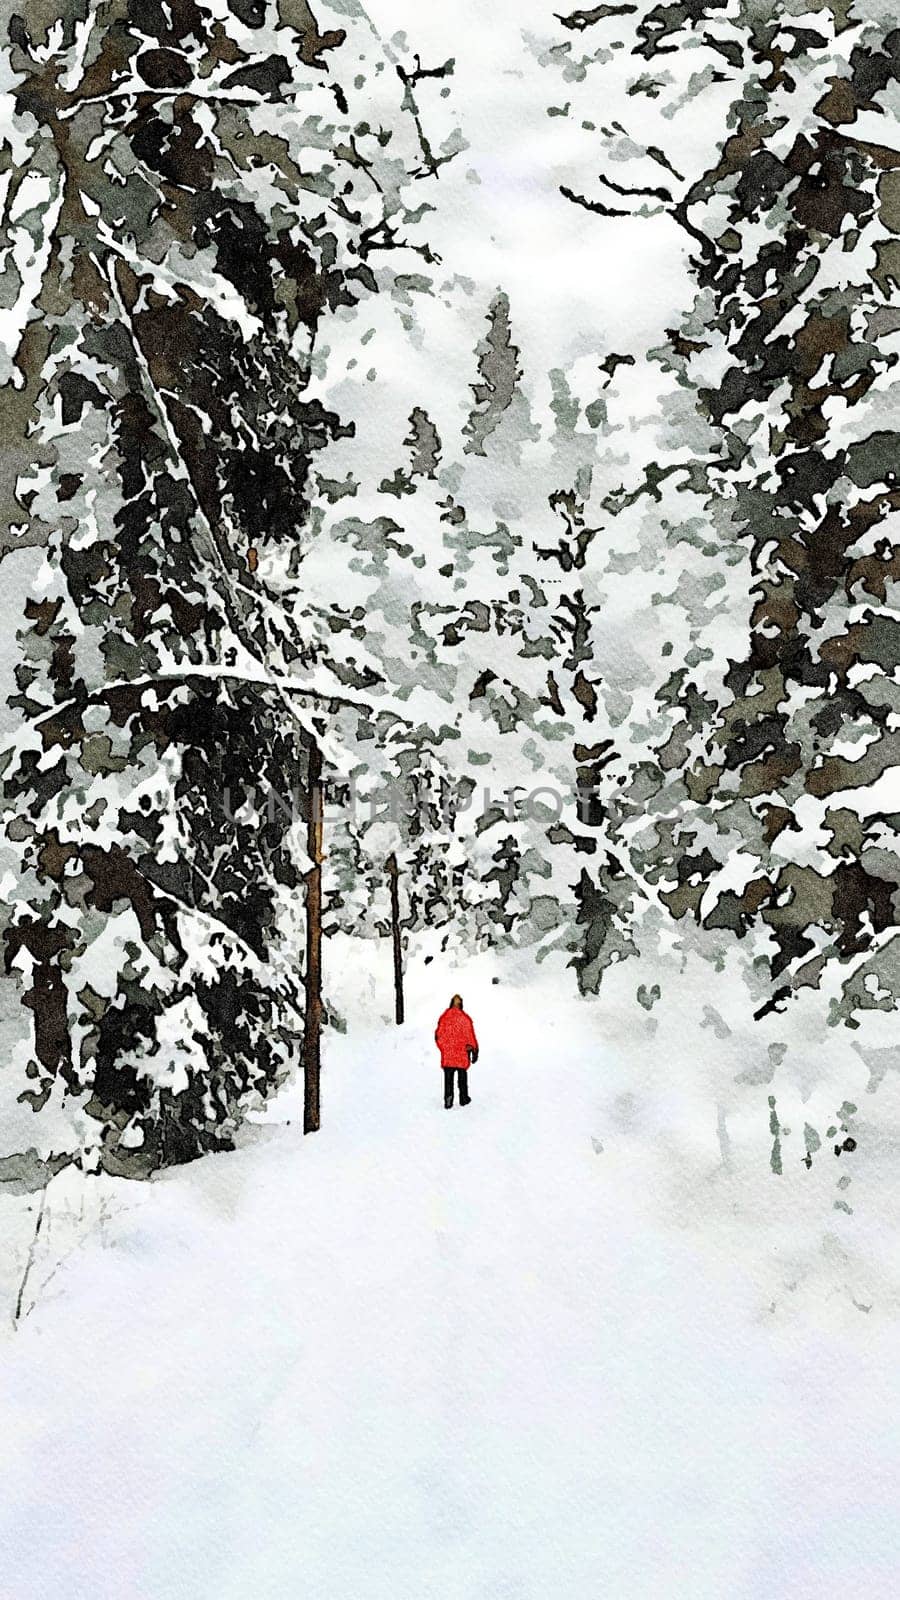 A person dressed in red walks alone in the snowy forest during a sunny day in winter.